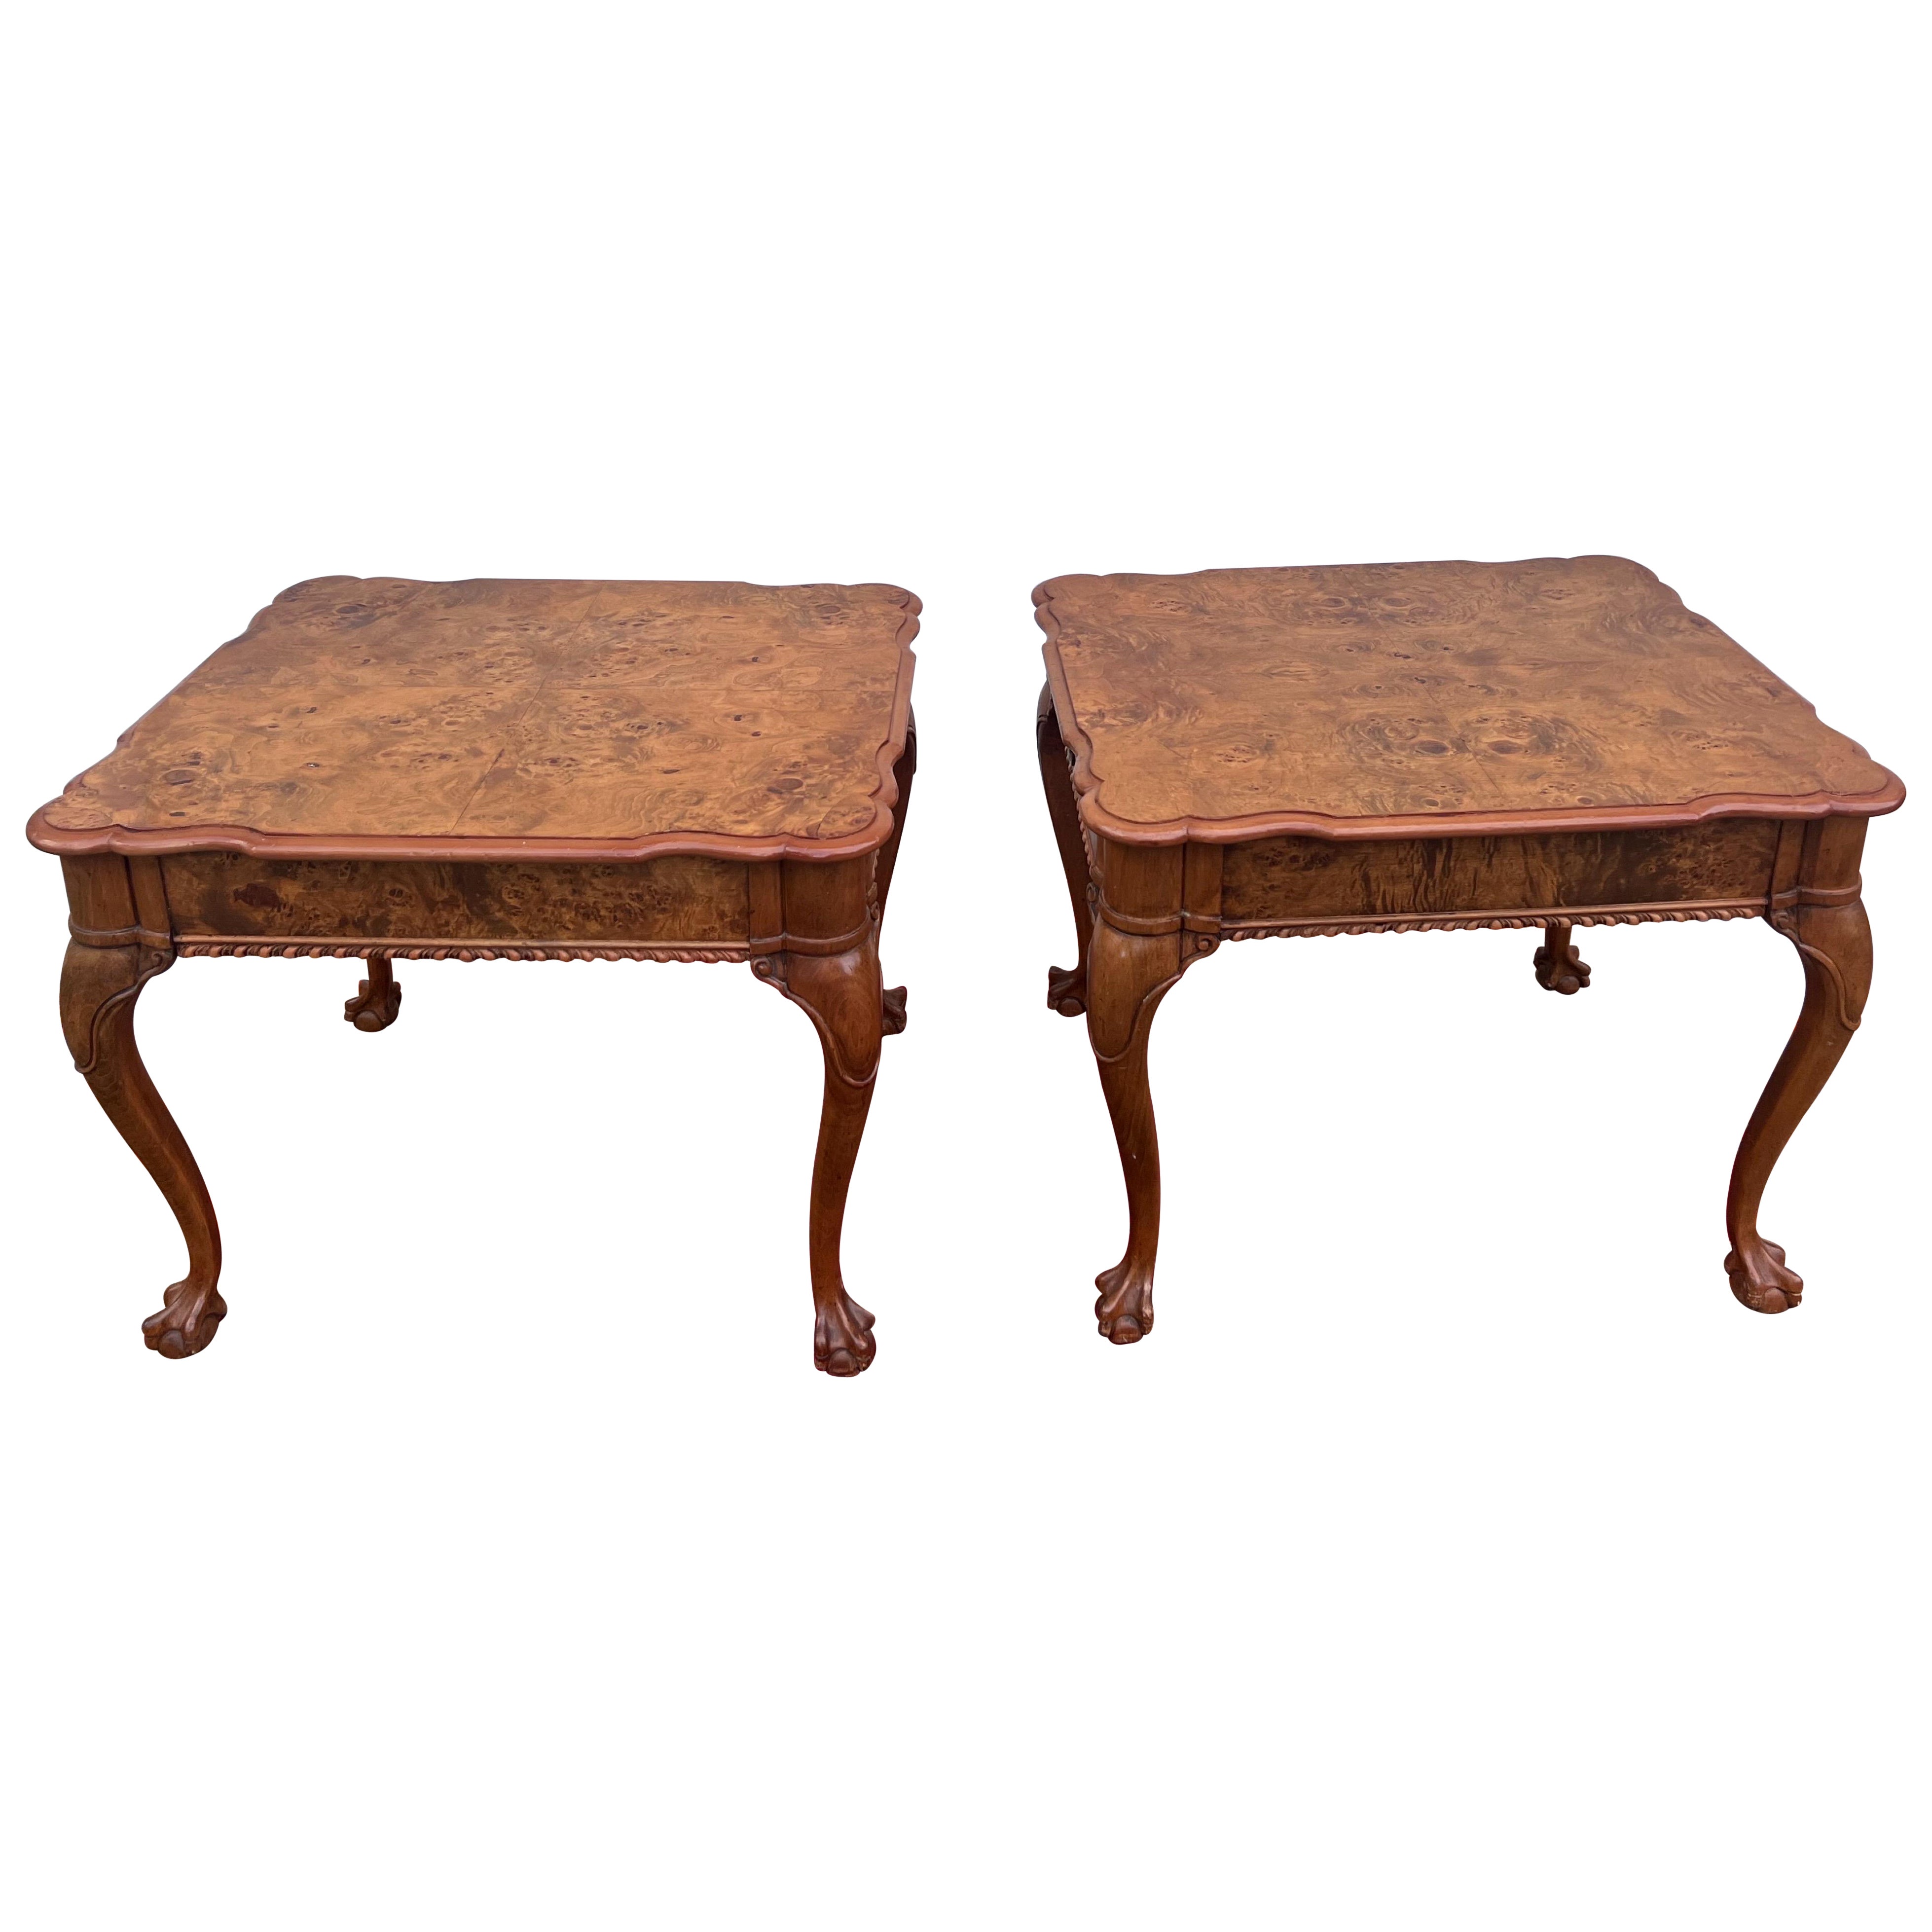 Vintage Matchbook Burl Ball and Claw Foot Side Tables For Sale